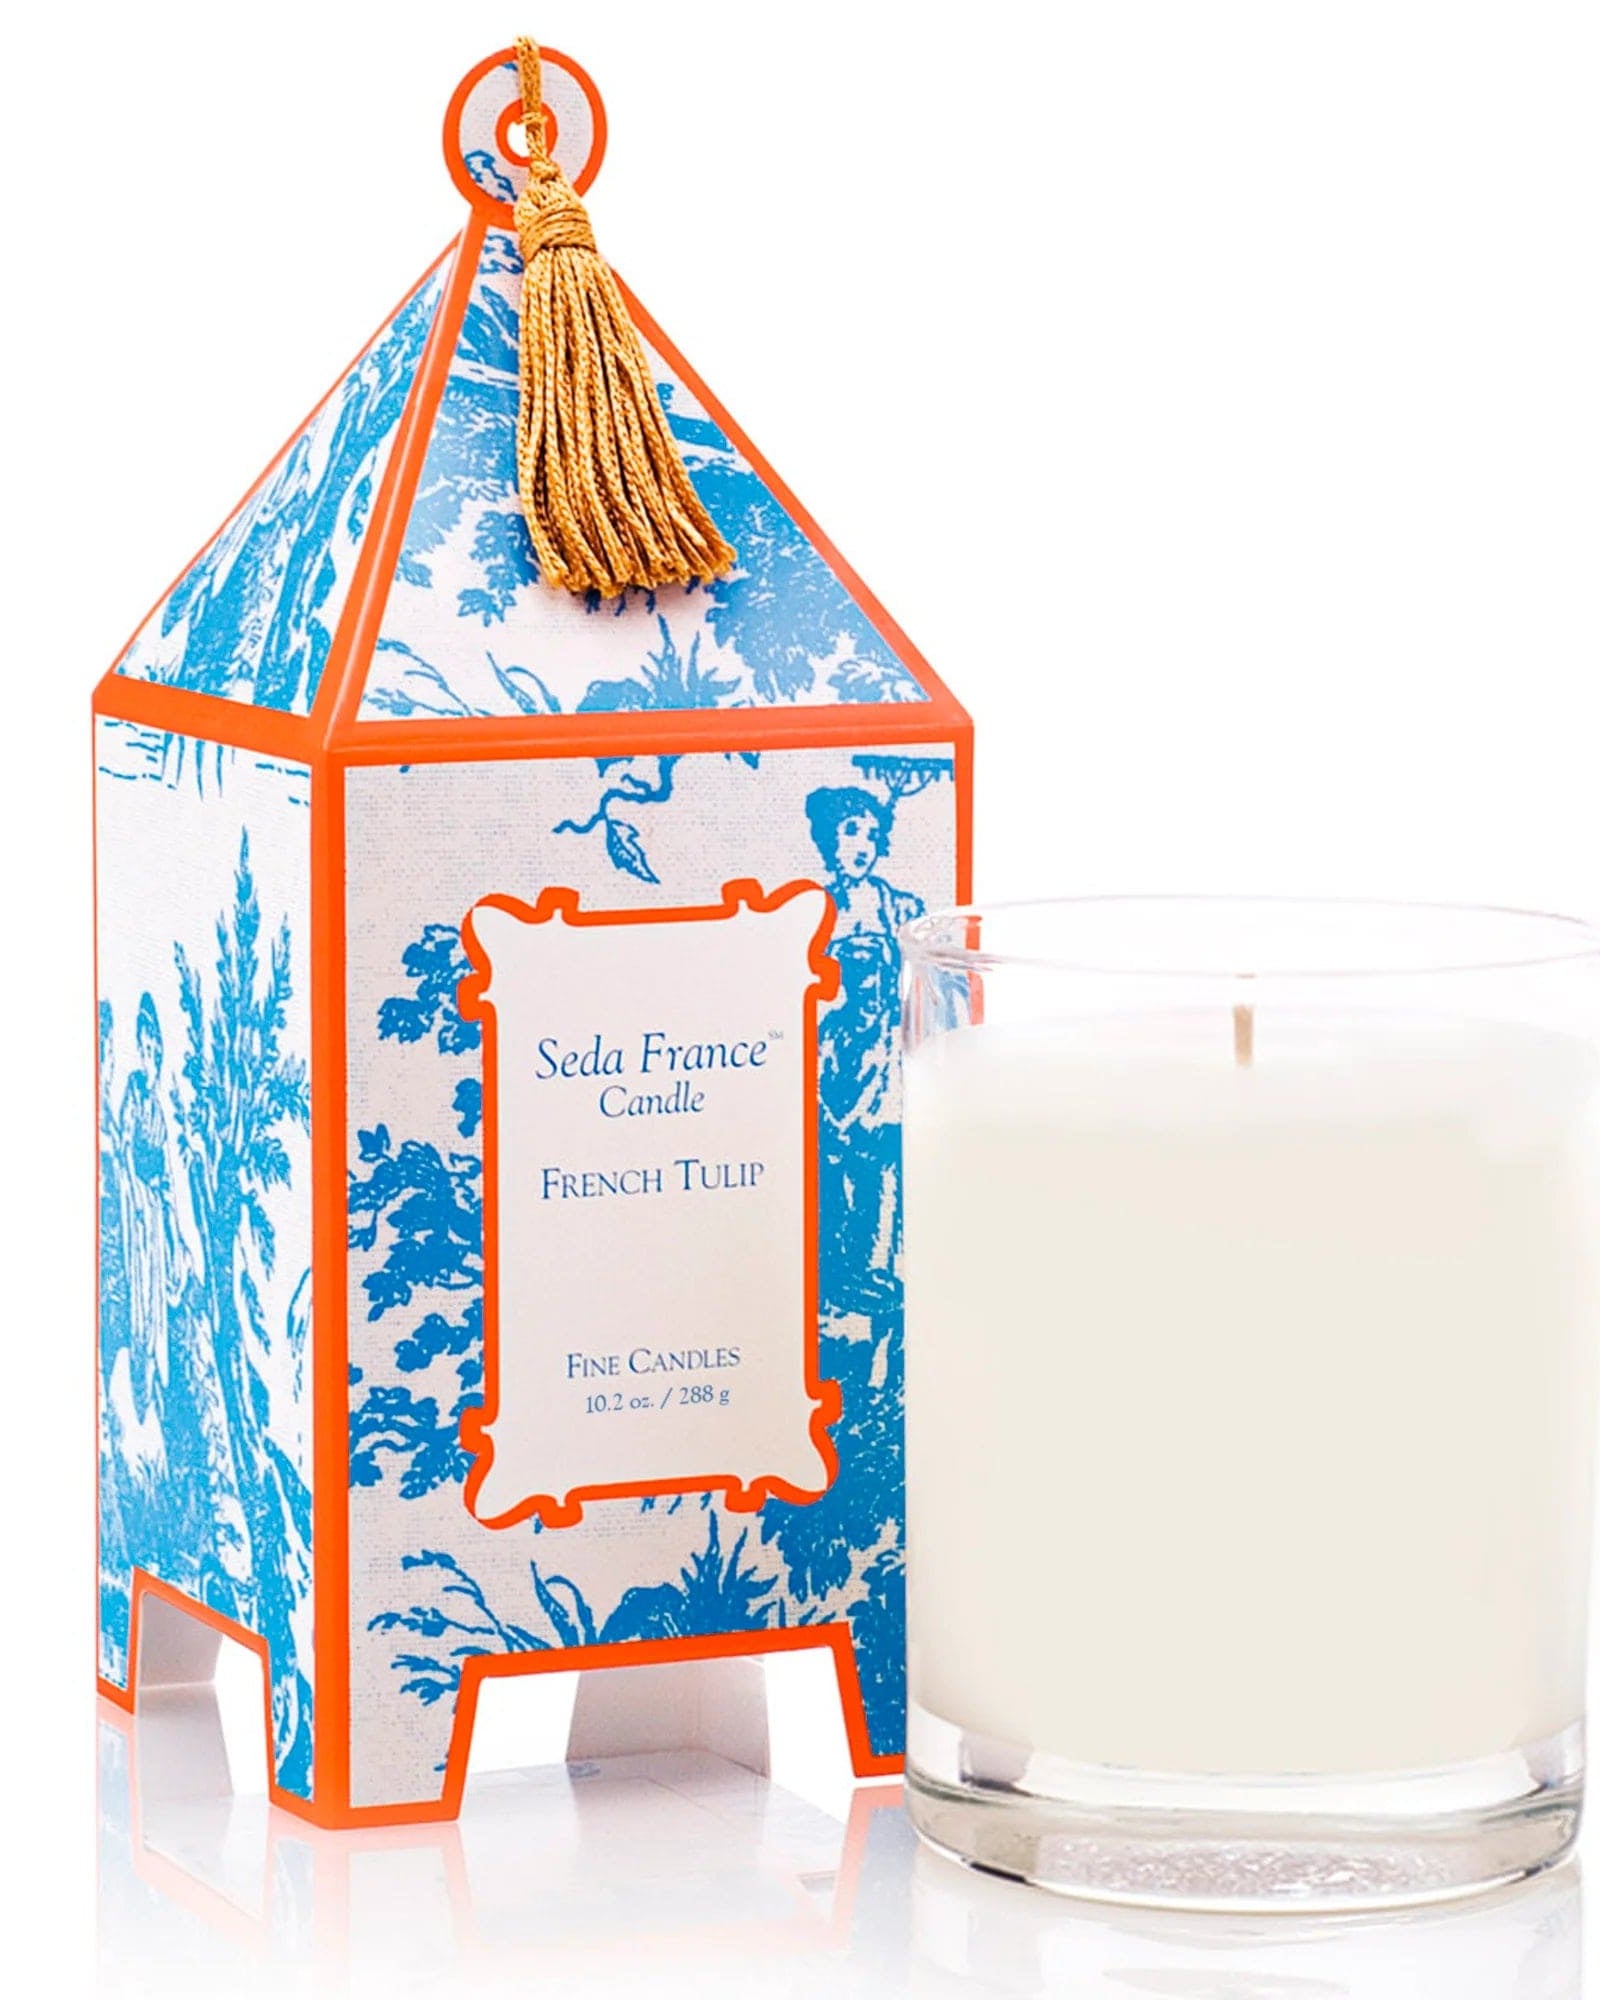 Seda France Candles Candles and Scents French Tulip Classic Toile Pagoda Box Candle